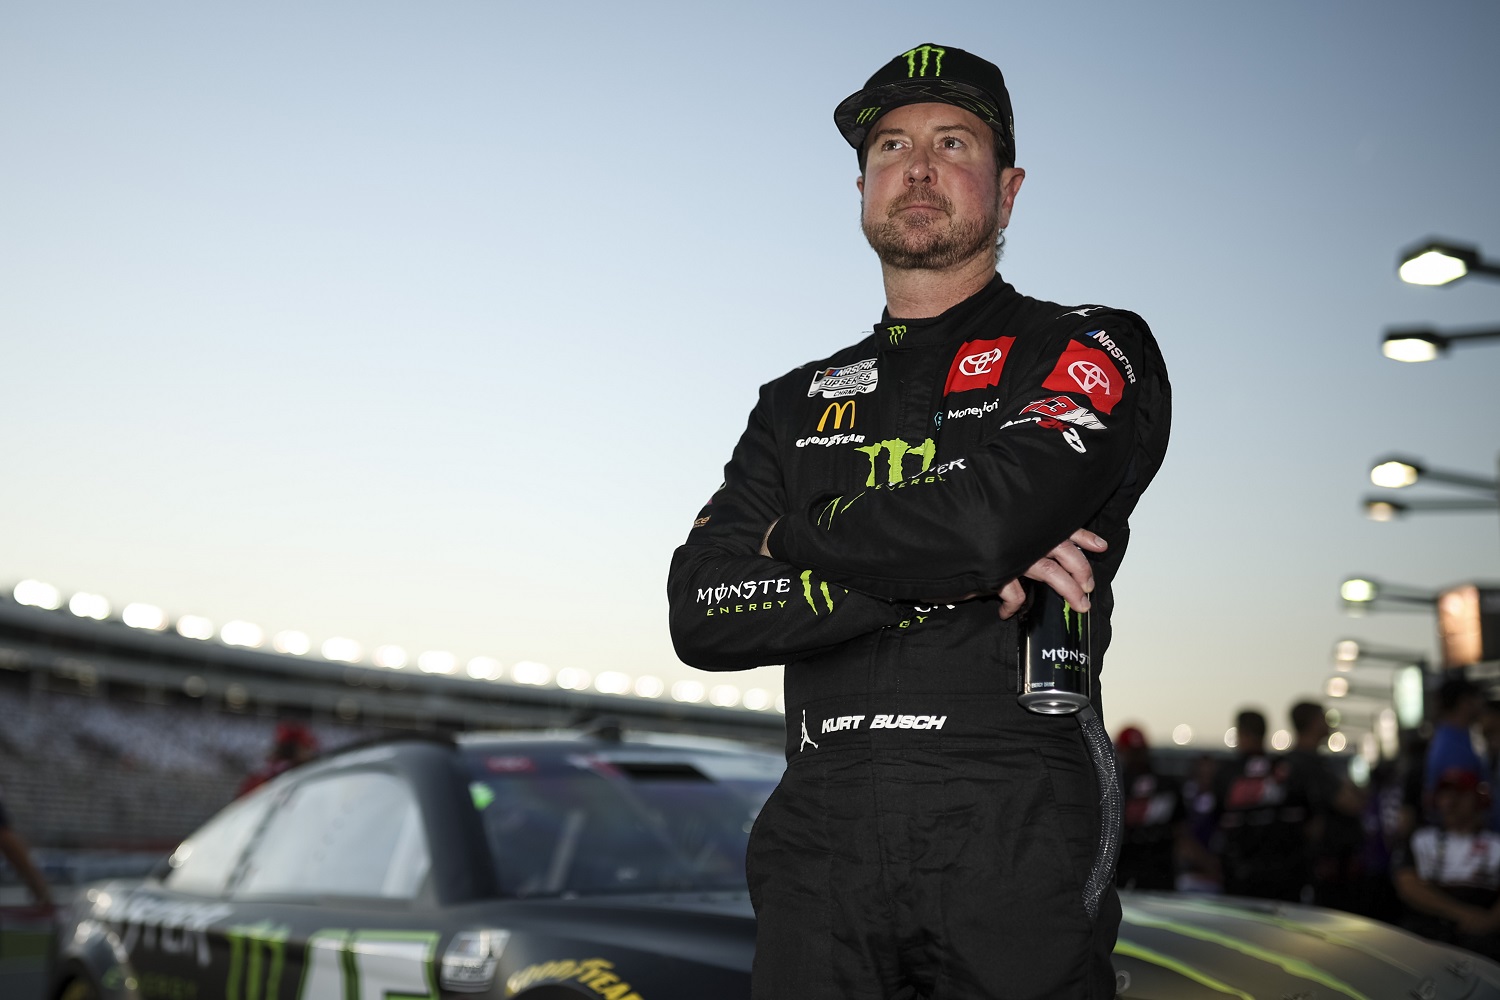 Kurt Busch looks on from the grid during practice for the NASCAR Cup Series Coca-Cola 600 at Charlotte Motor Speedway on May 28, 2022 in Concord, North Carolina. | James Gilbert/Getty Images